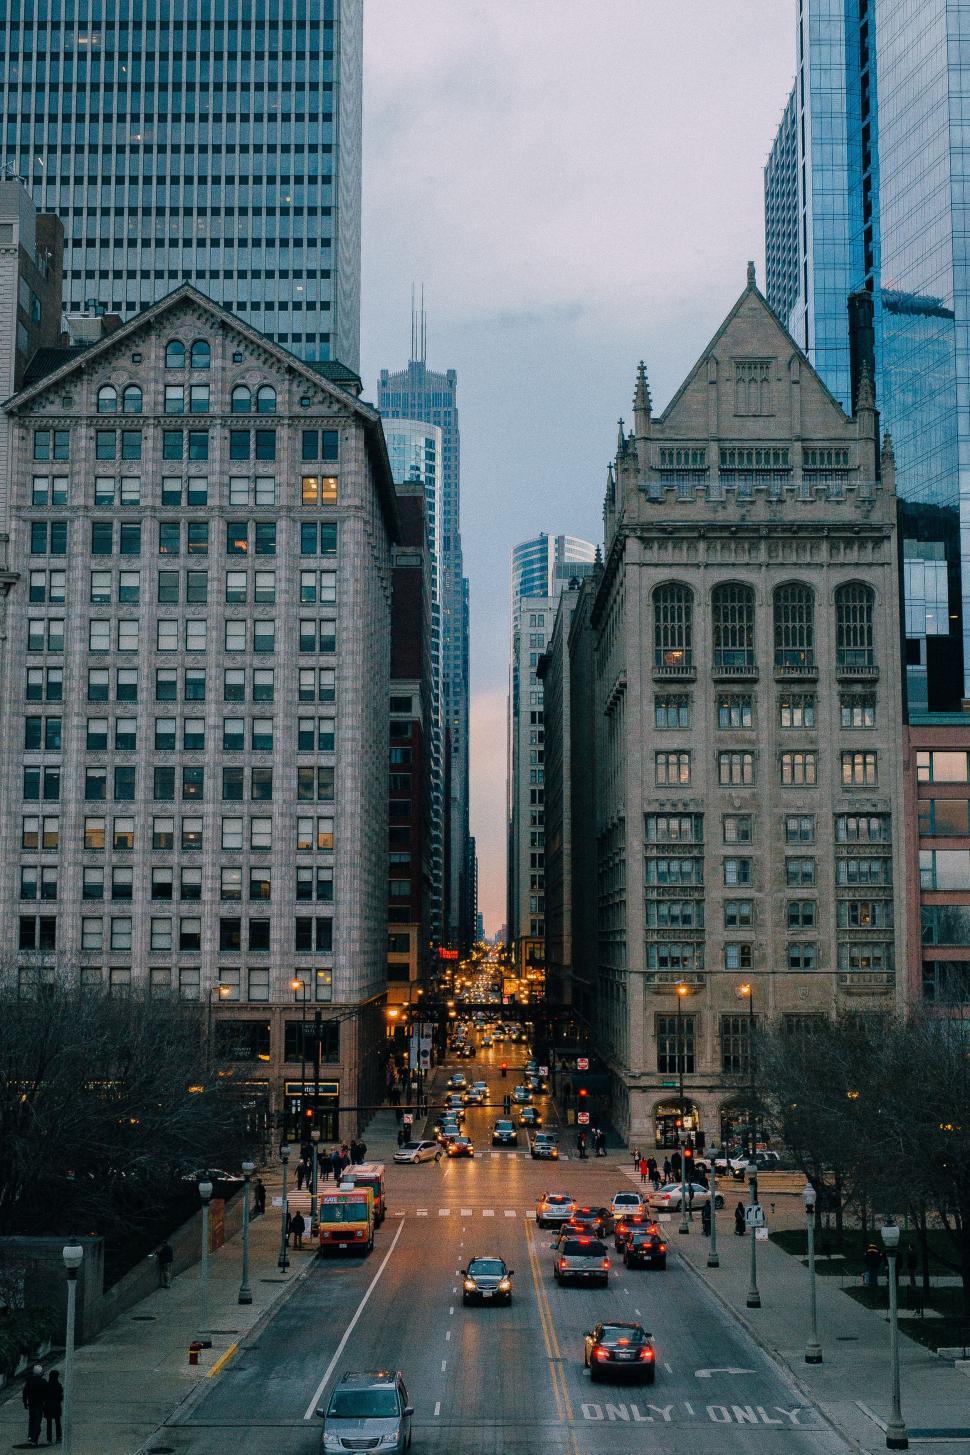 Free Image of City Street Packed With Tall Buildings 